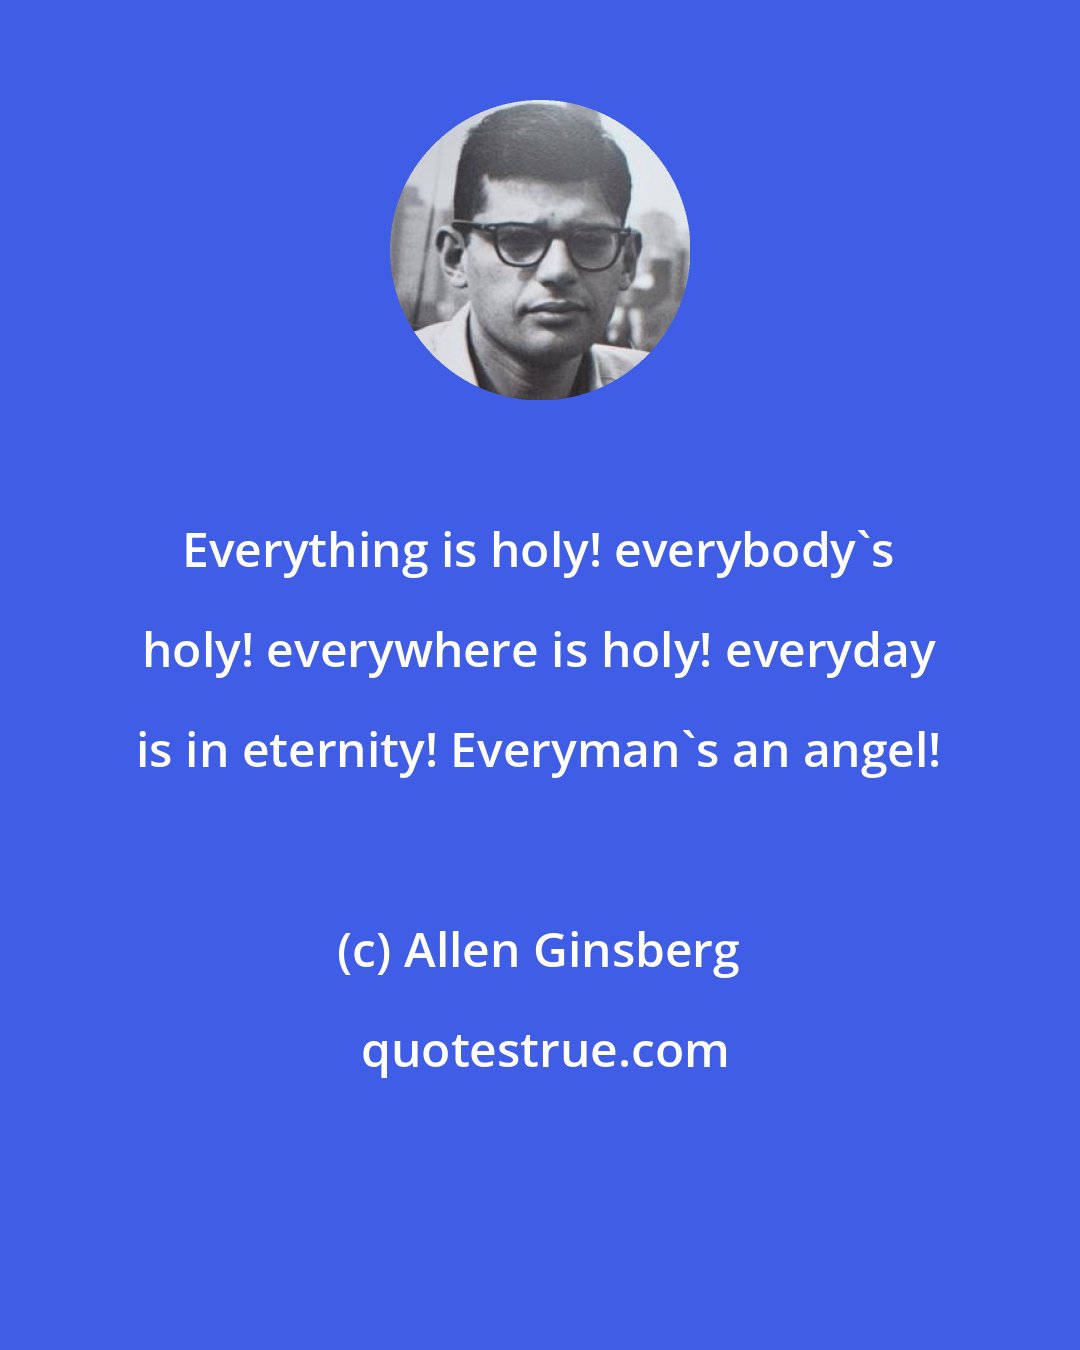 Allen Ginsberg: Everything is holy! everybody's holy! everywhere is holy! everyday is in eternity! Everyman's an angel!